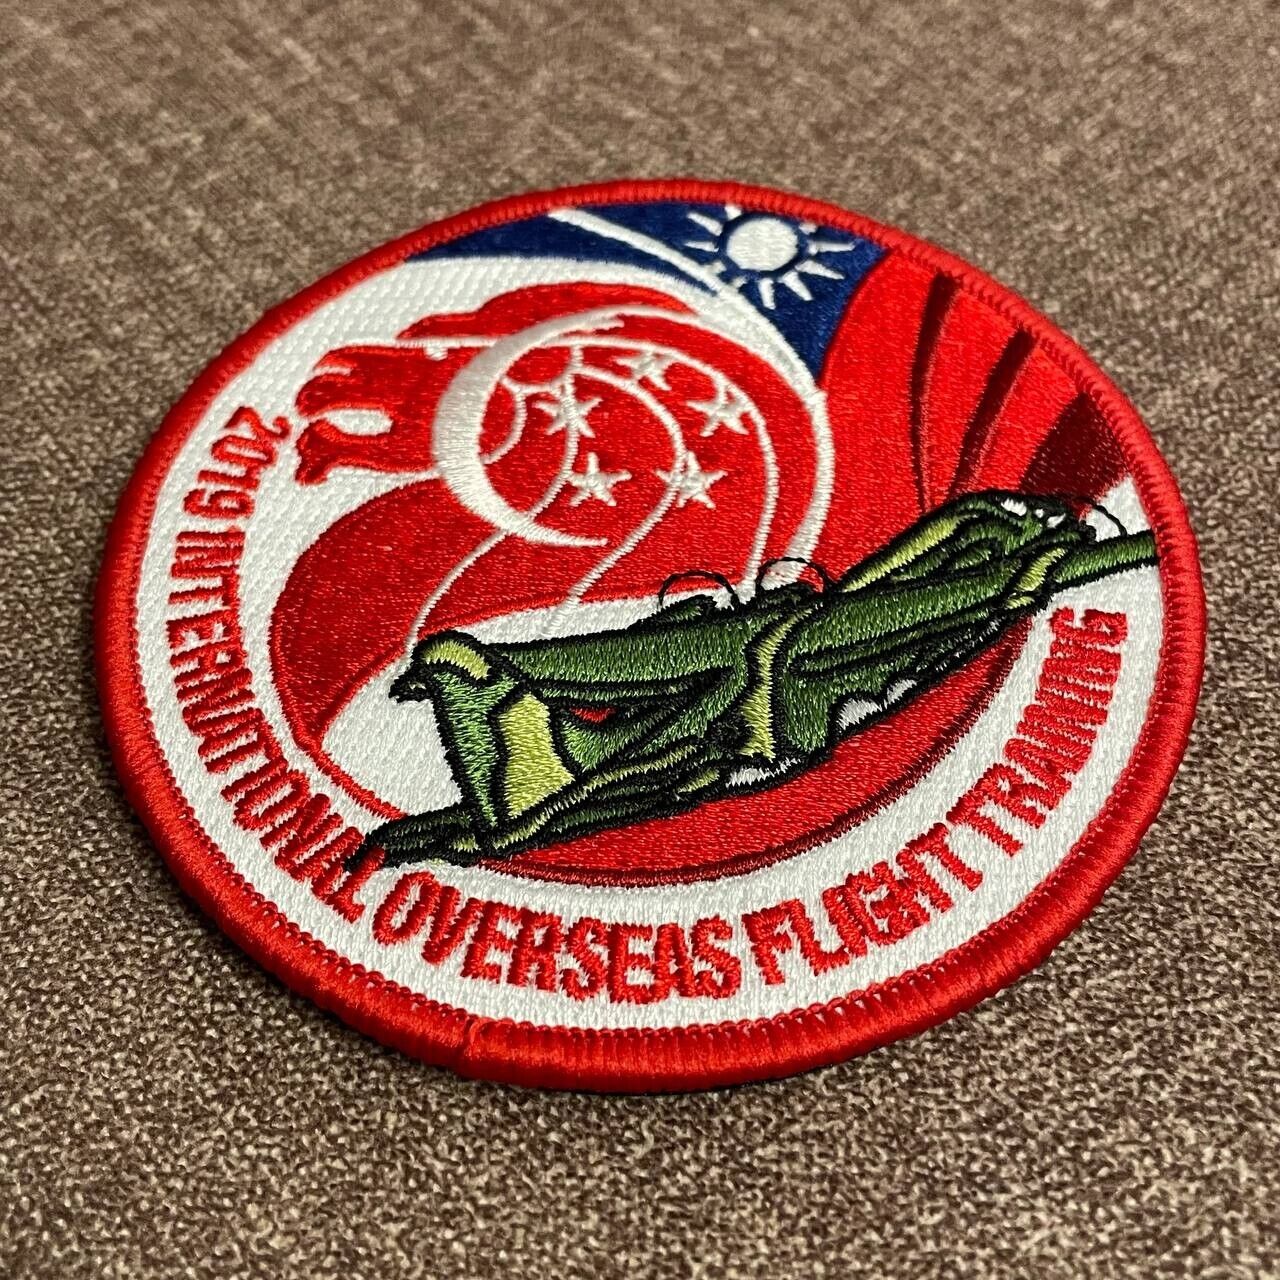 RSAF Singapore Air Force Taiwan 2019 Patch